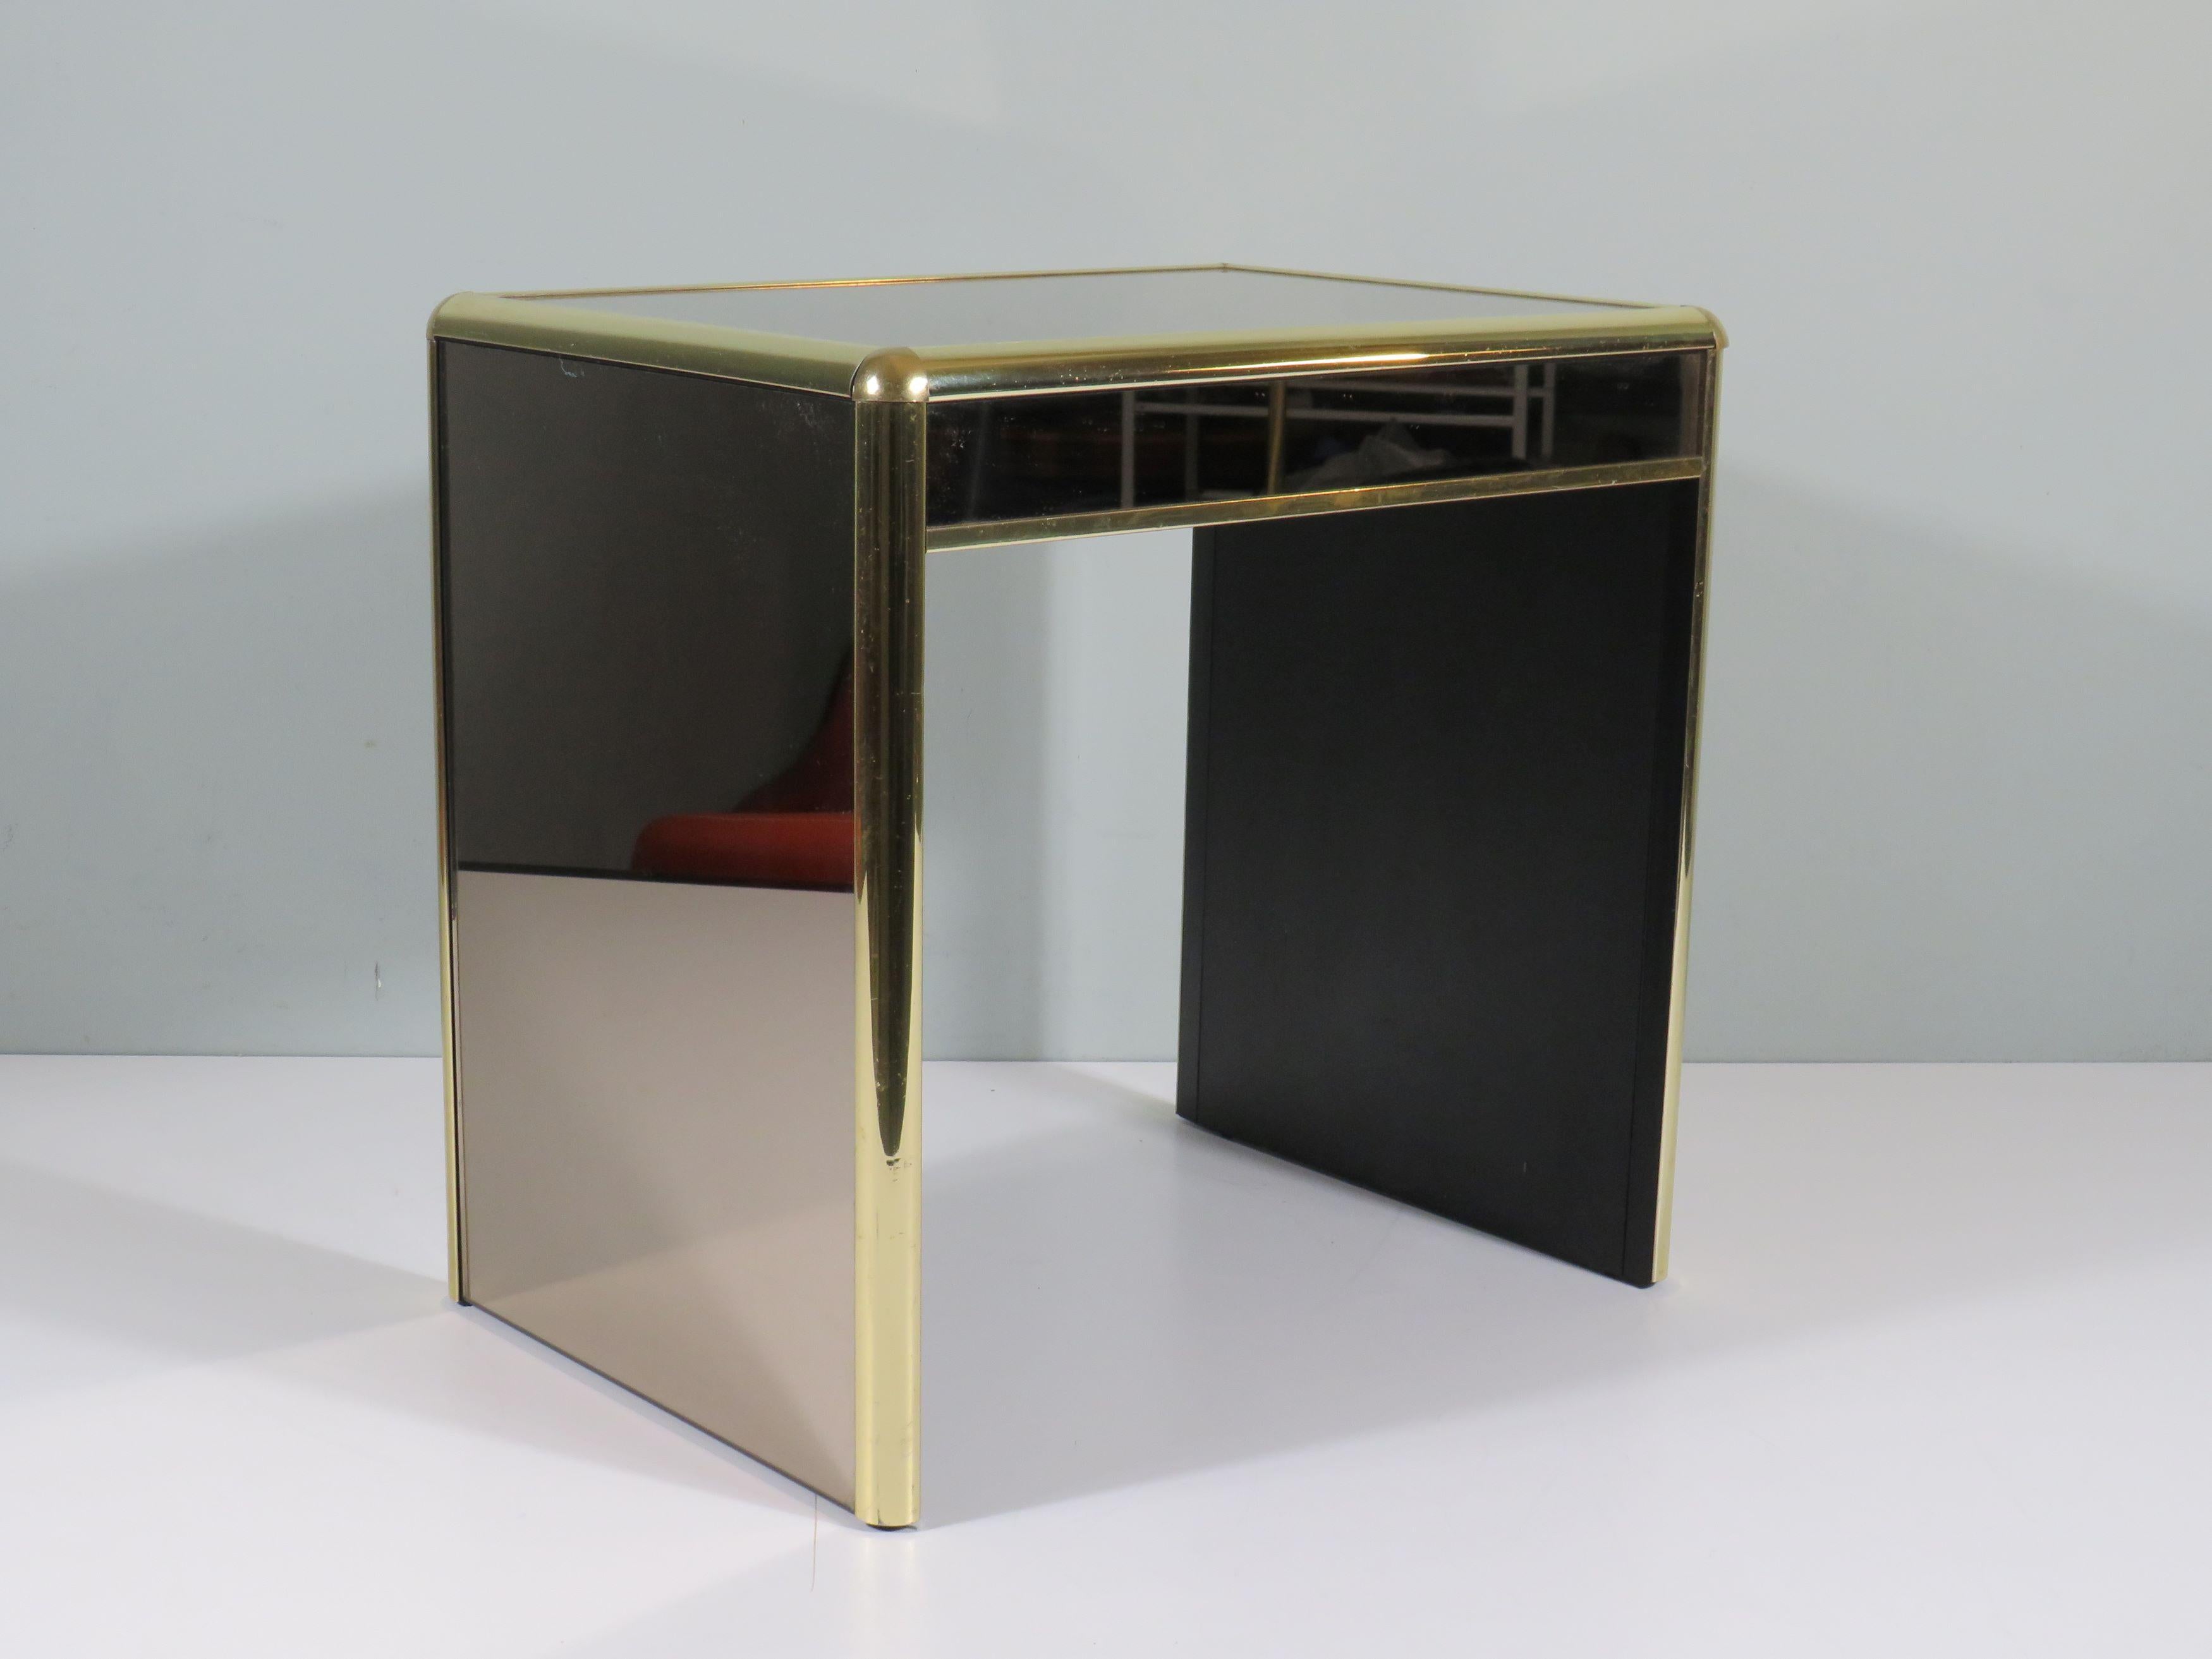 Heavy table with brass and smoked mirror glass.
In the style of Willy Rizzo and Tommassi Barbi.
If there is no shipping price listed for your place of residence, please do not hesitate to send me a message, I will be happy to provide you with a good